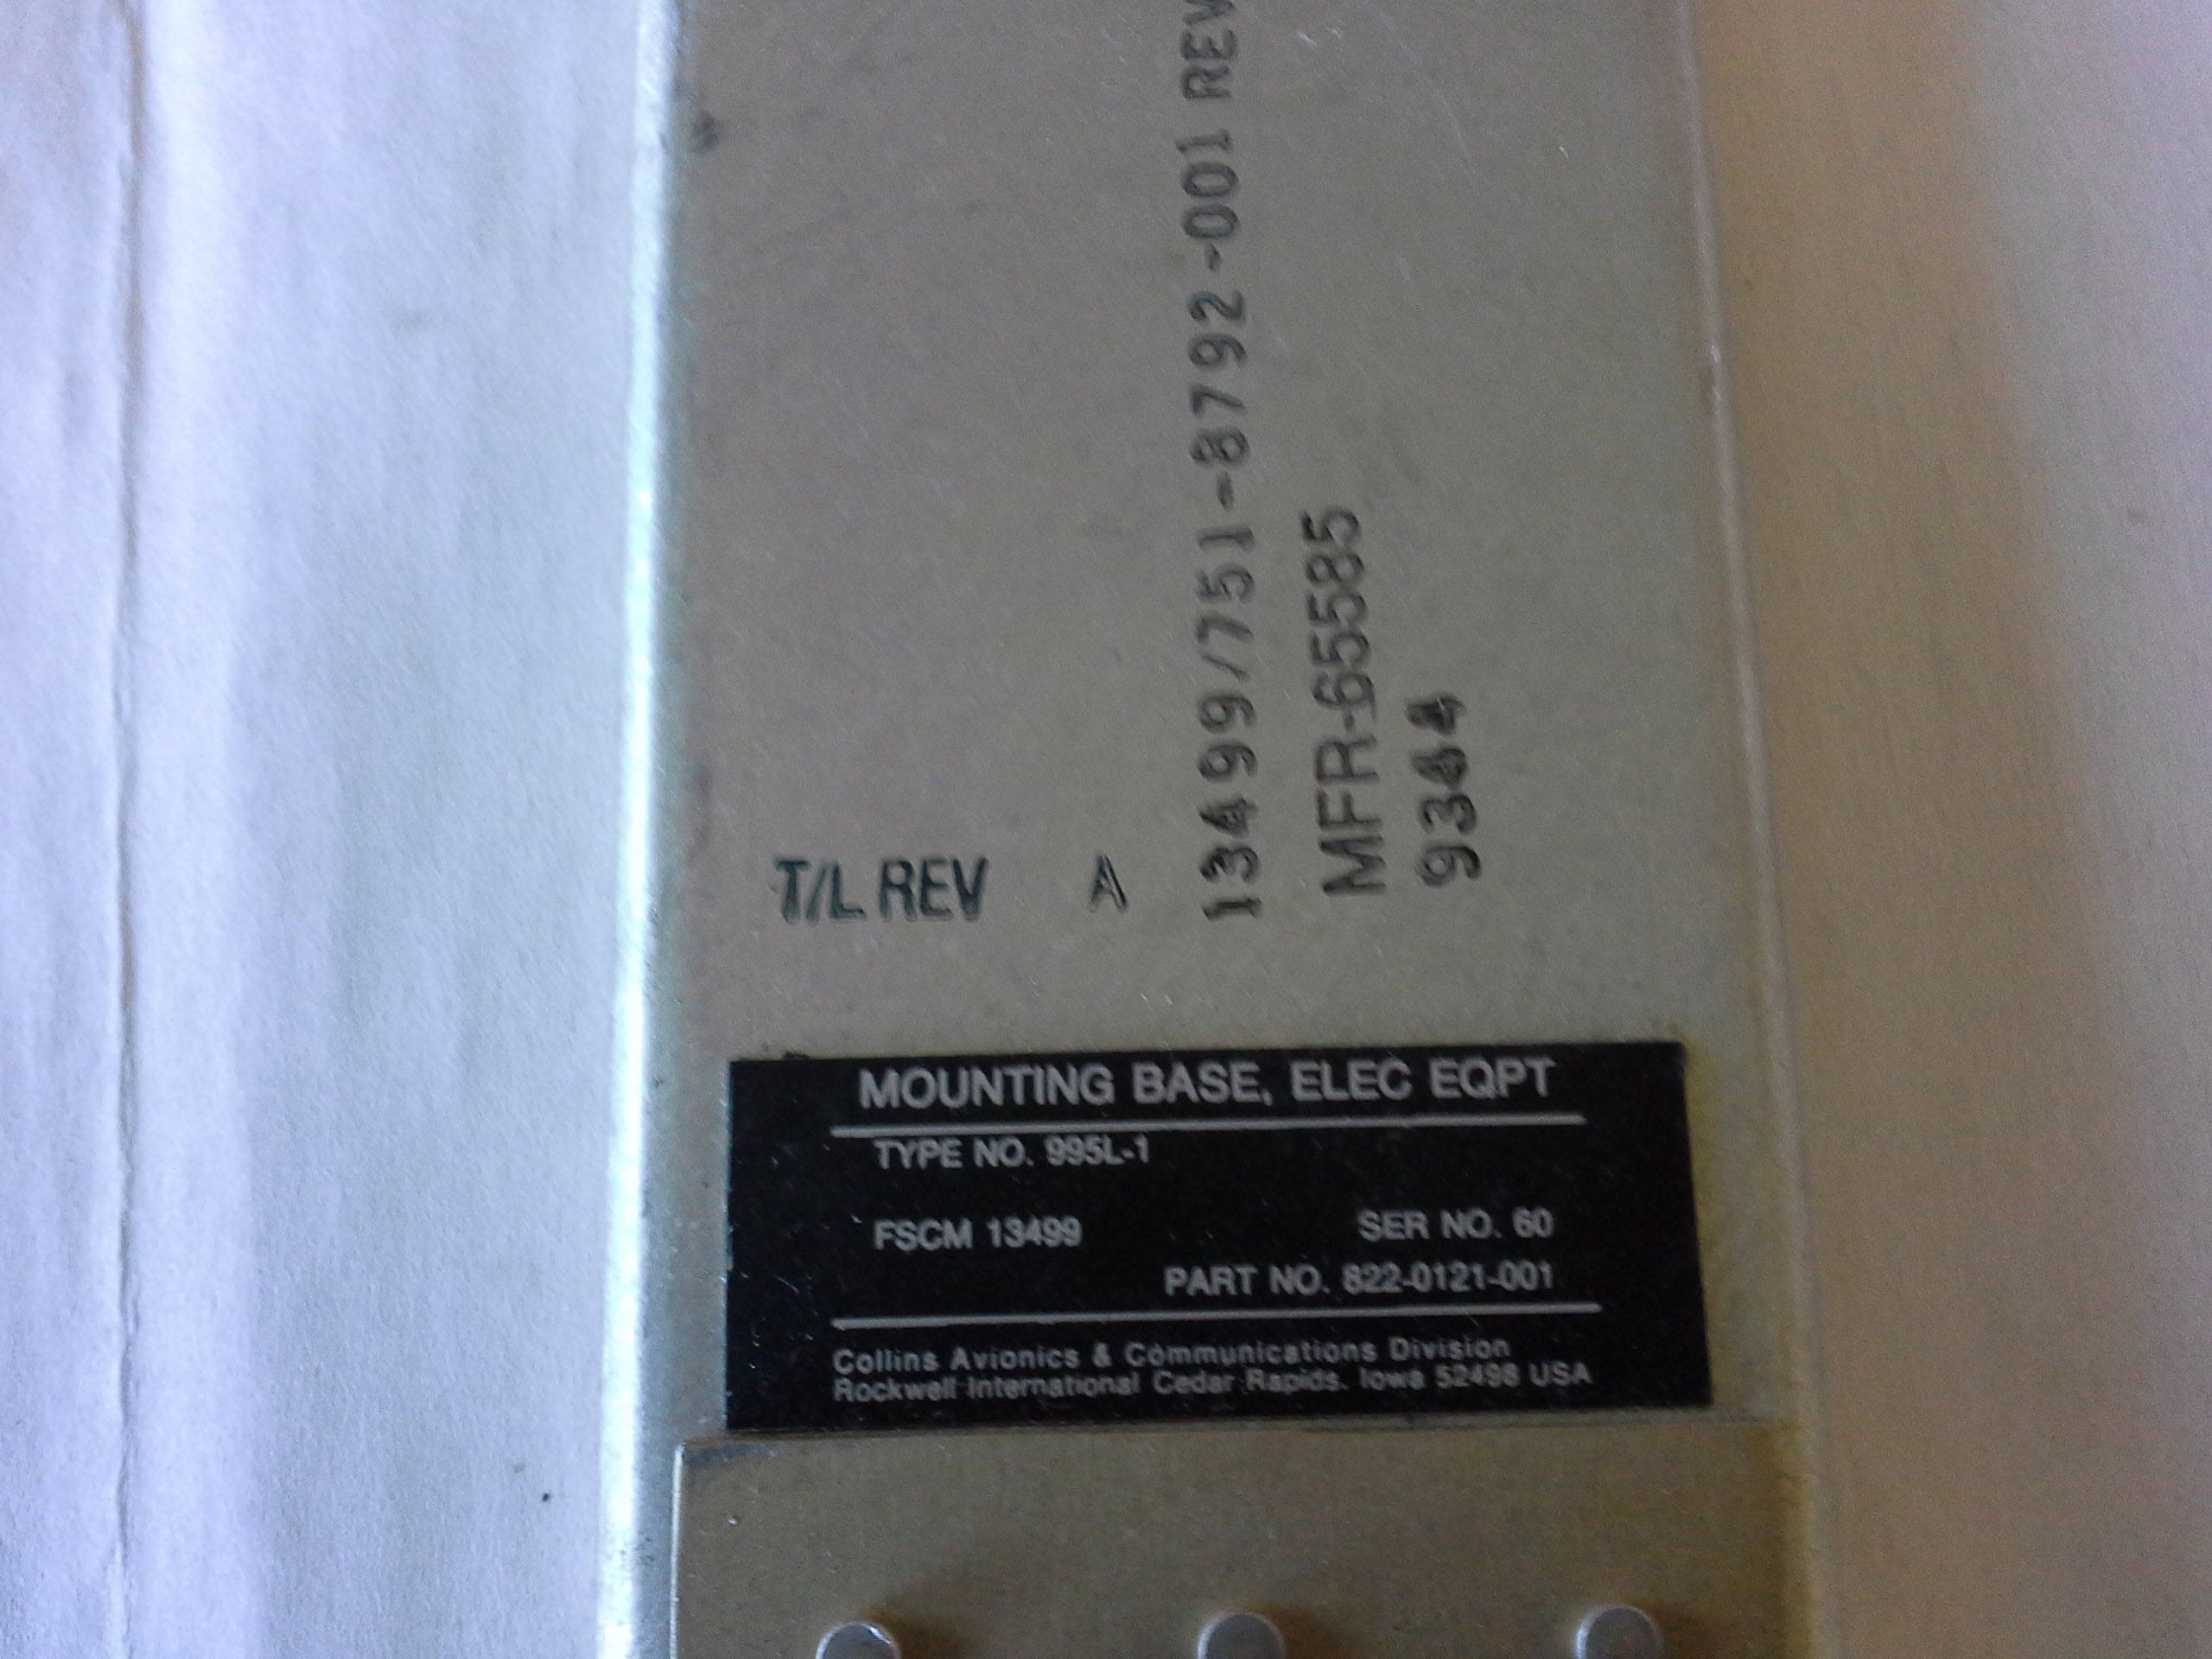 Mounting Base, Electrical Equipment Typ 995 L-1